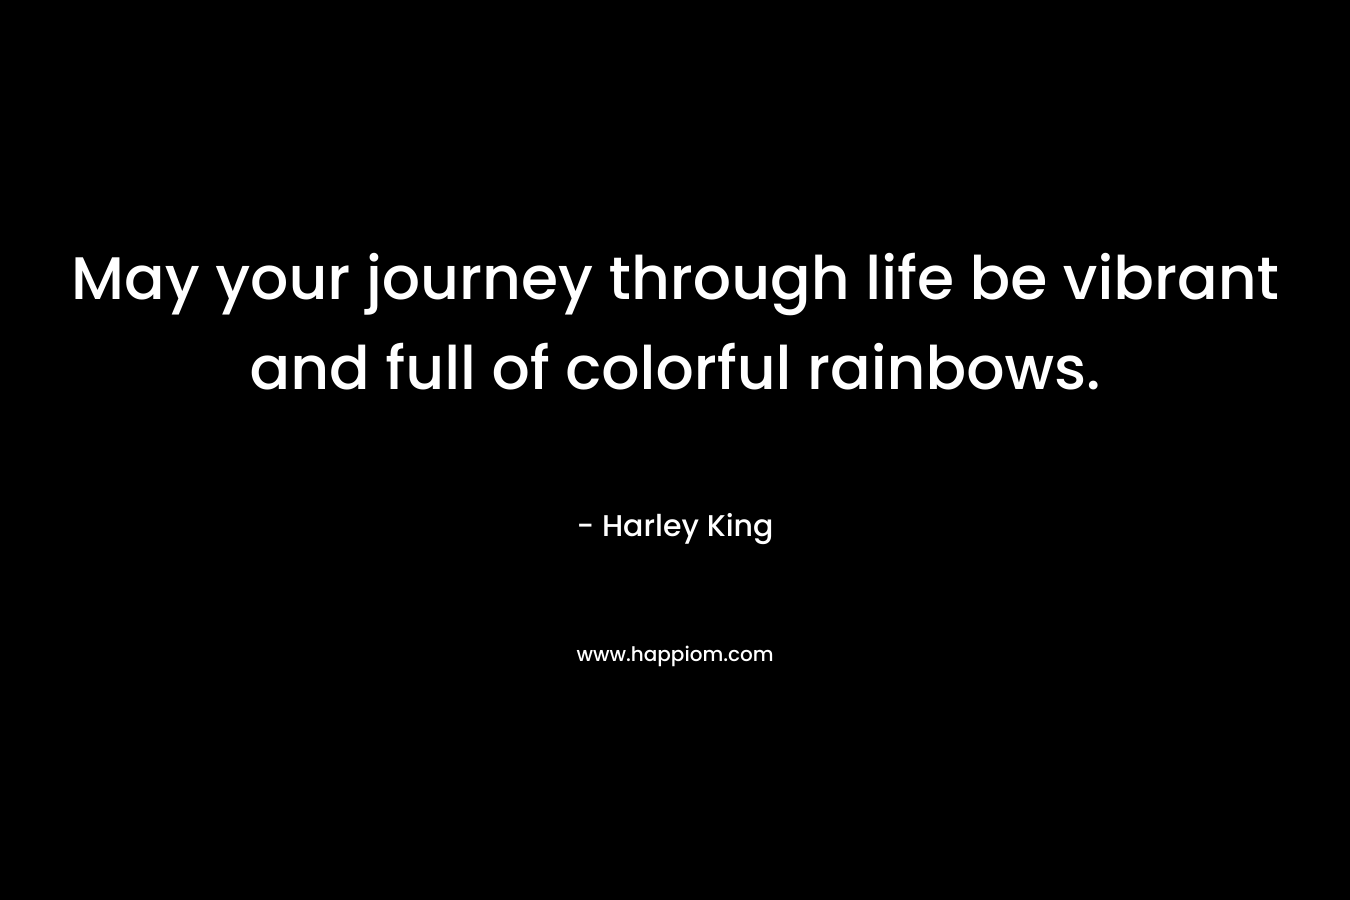 May your journey through life be vibrant and full of colorful rainbows. – Harley King